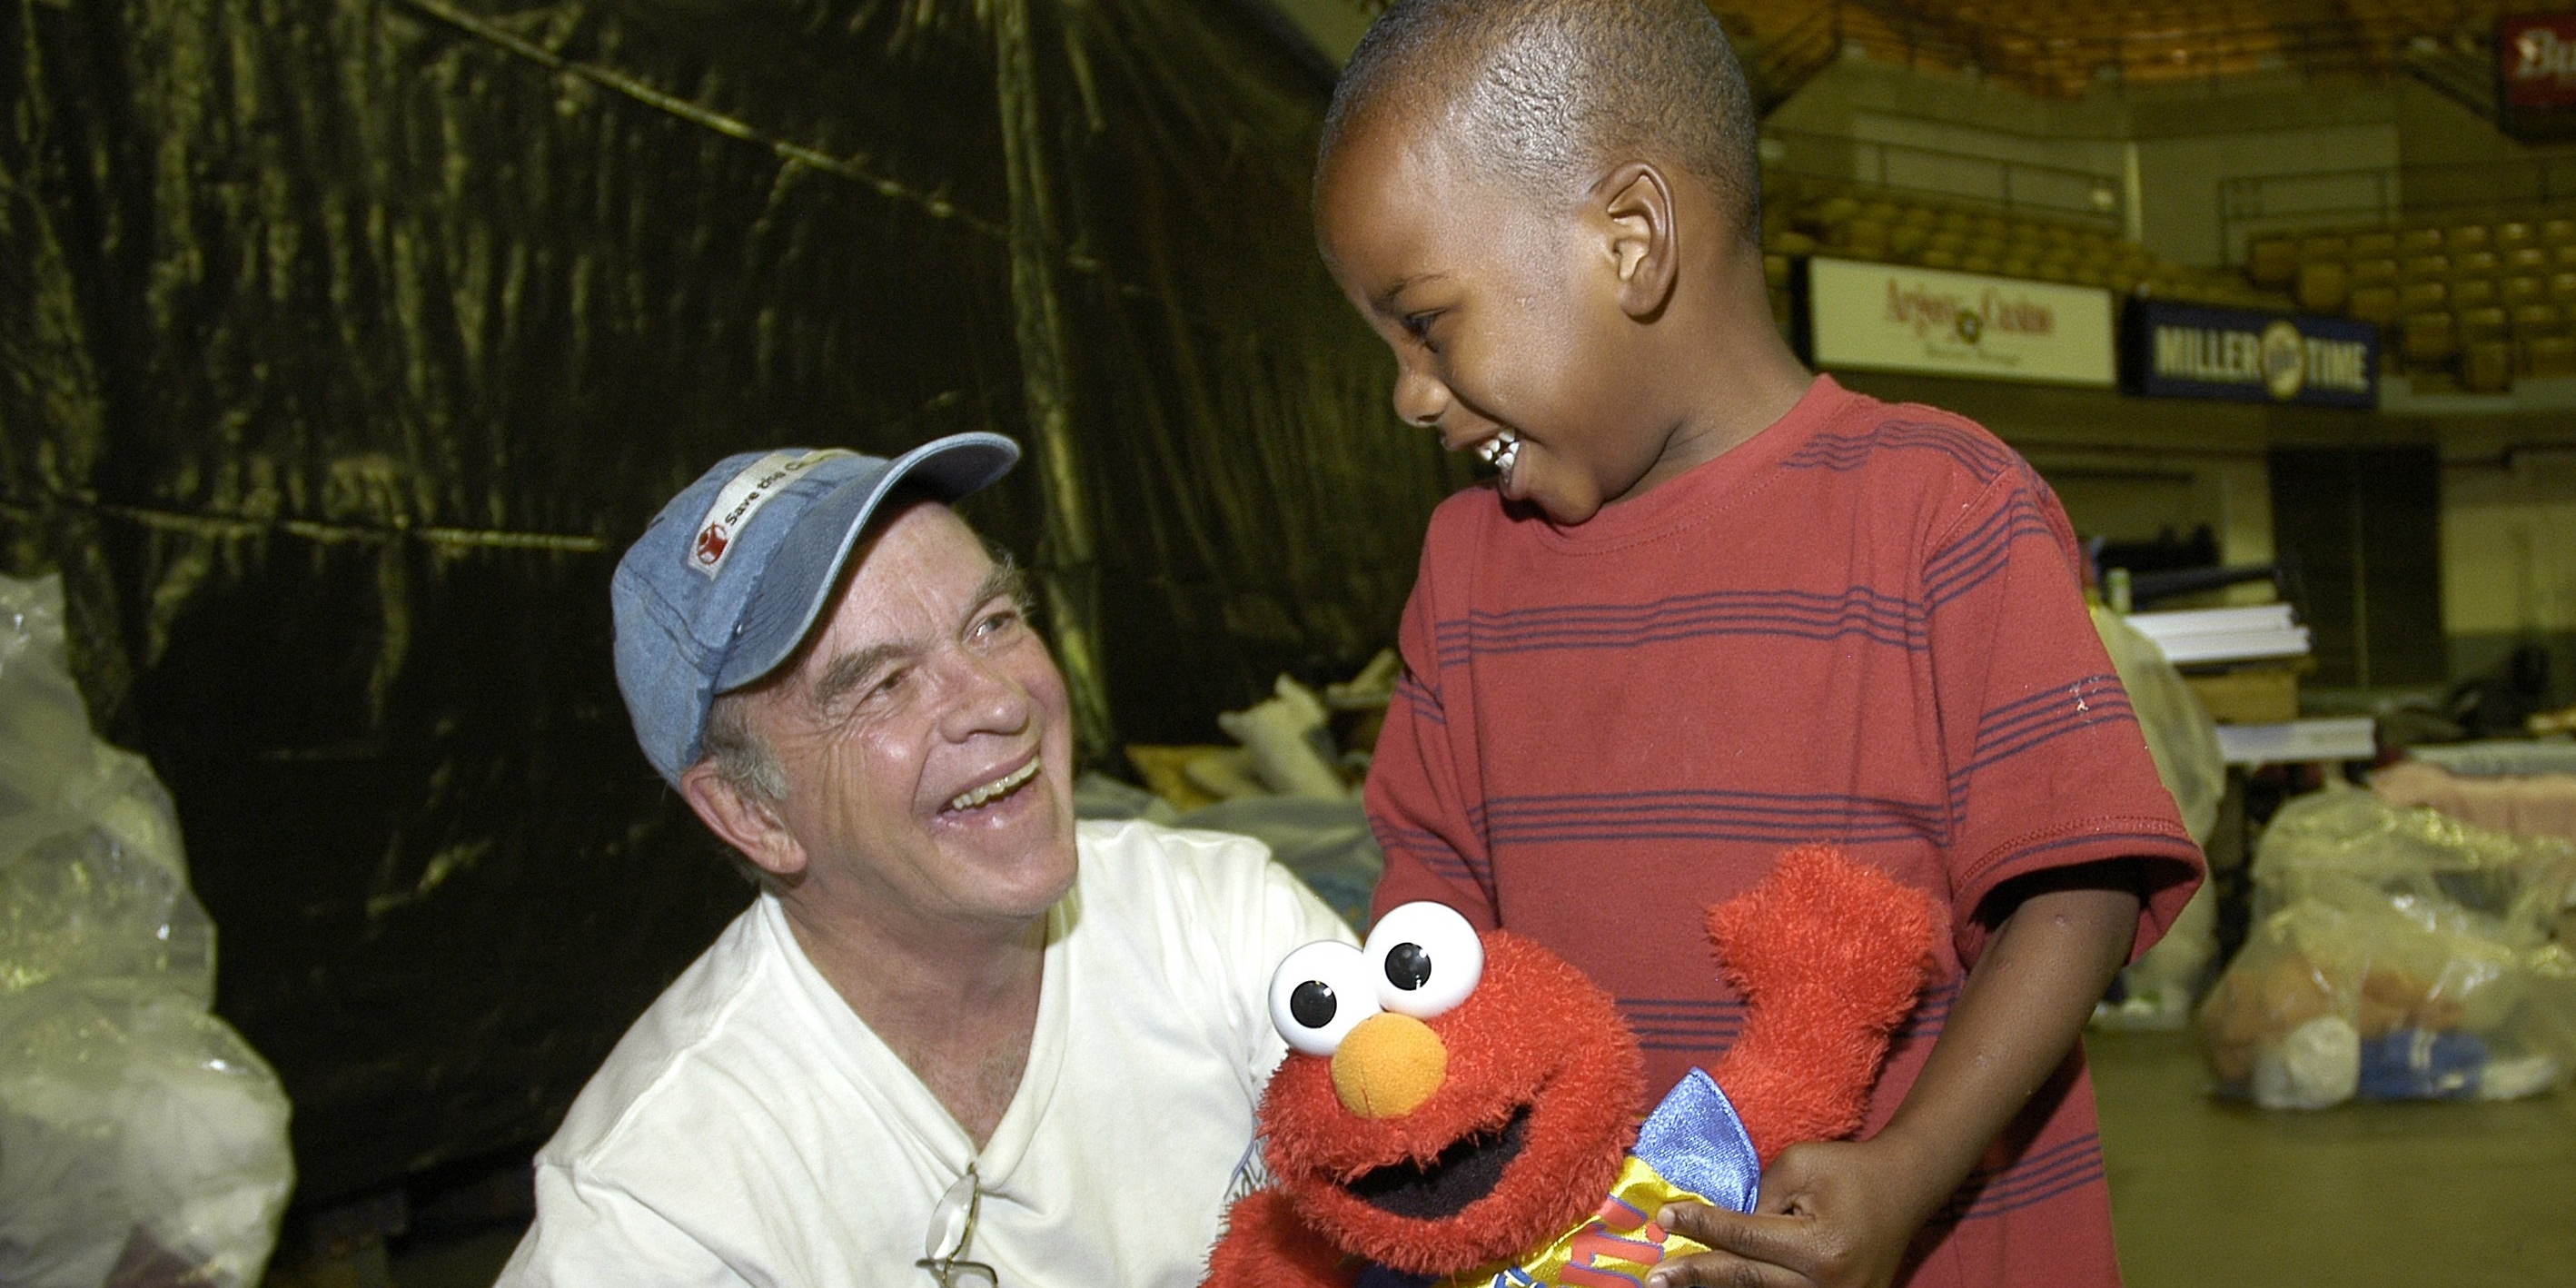 A three-year-old shares a moment of fun with Save the Children's emergency response specialist, Dudley Conneely, at a center Baton Rouge, Louisiana. Save the Children set up child-friendly places to help children recovering from Hurricane Katrina have a safe place to play and recover, while their parents work to rebuild their lives. Photo Credit: Jim Loring/Save the Children 2005.